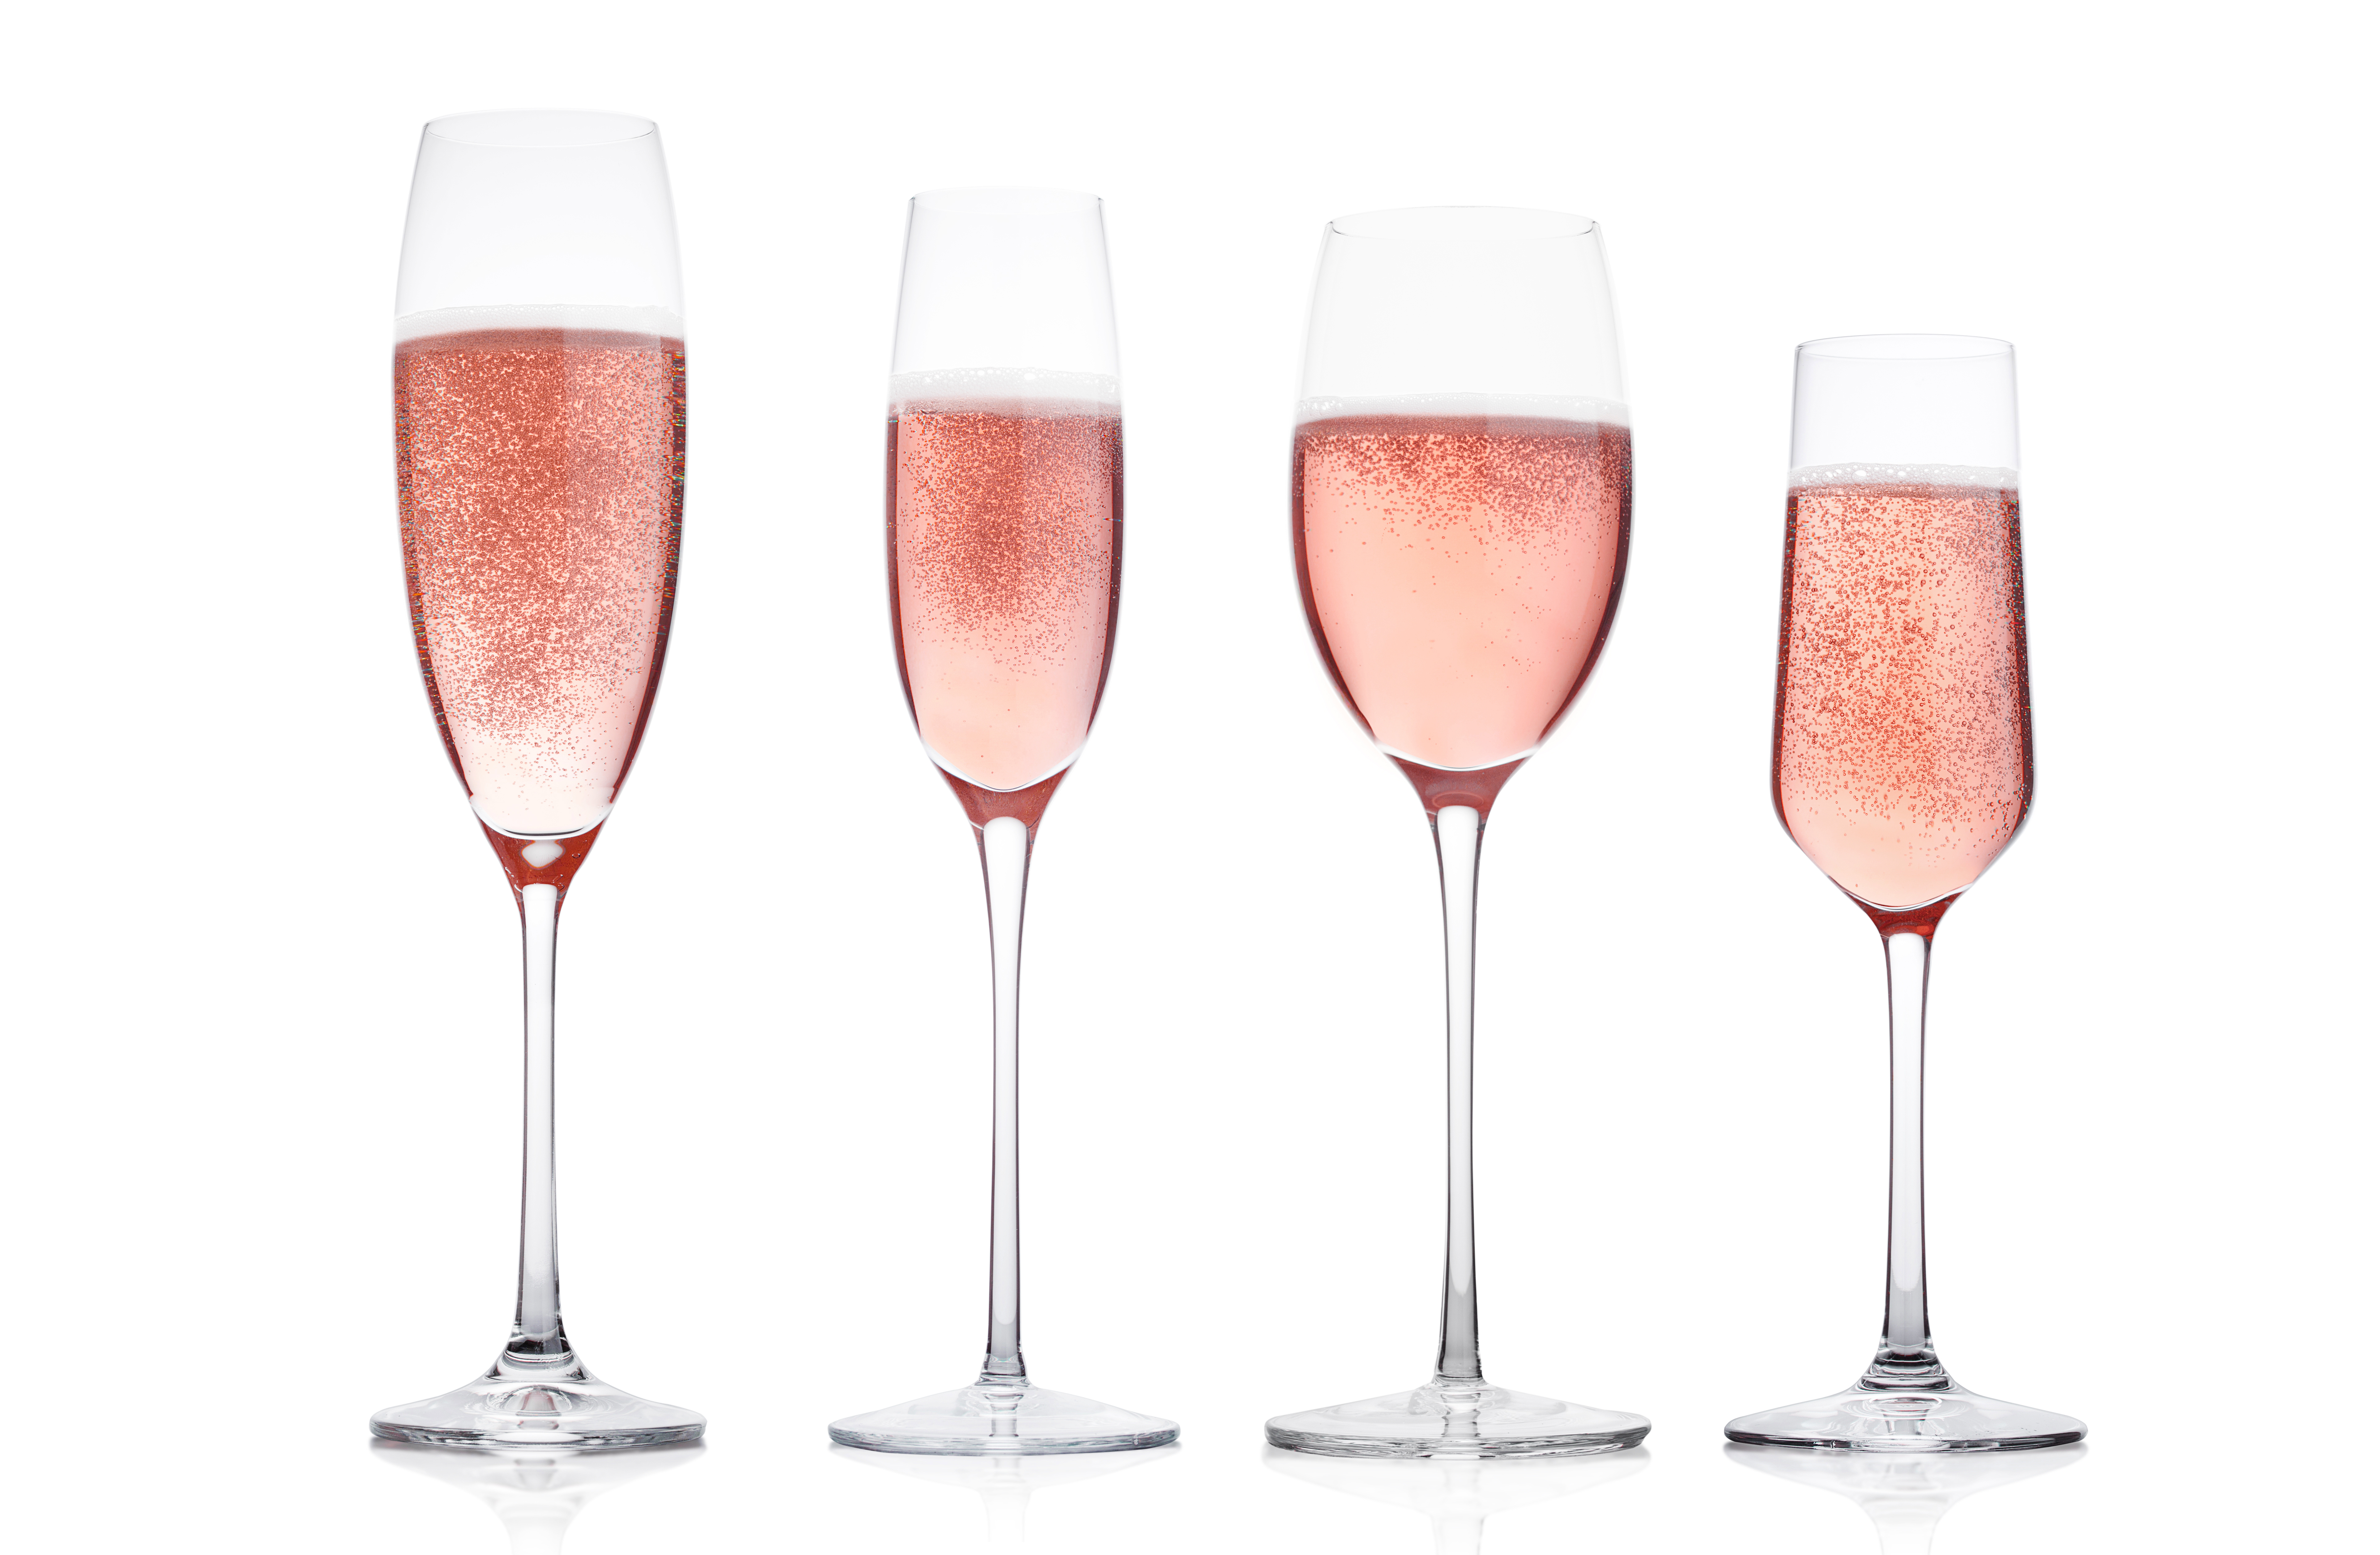 4 Varying designs of wine glasses fill with bubbly Pink Prosecco